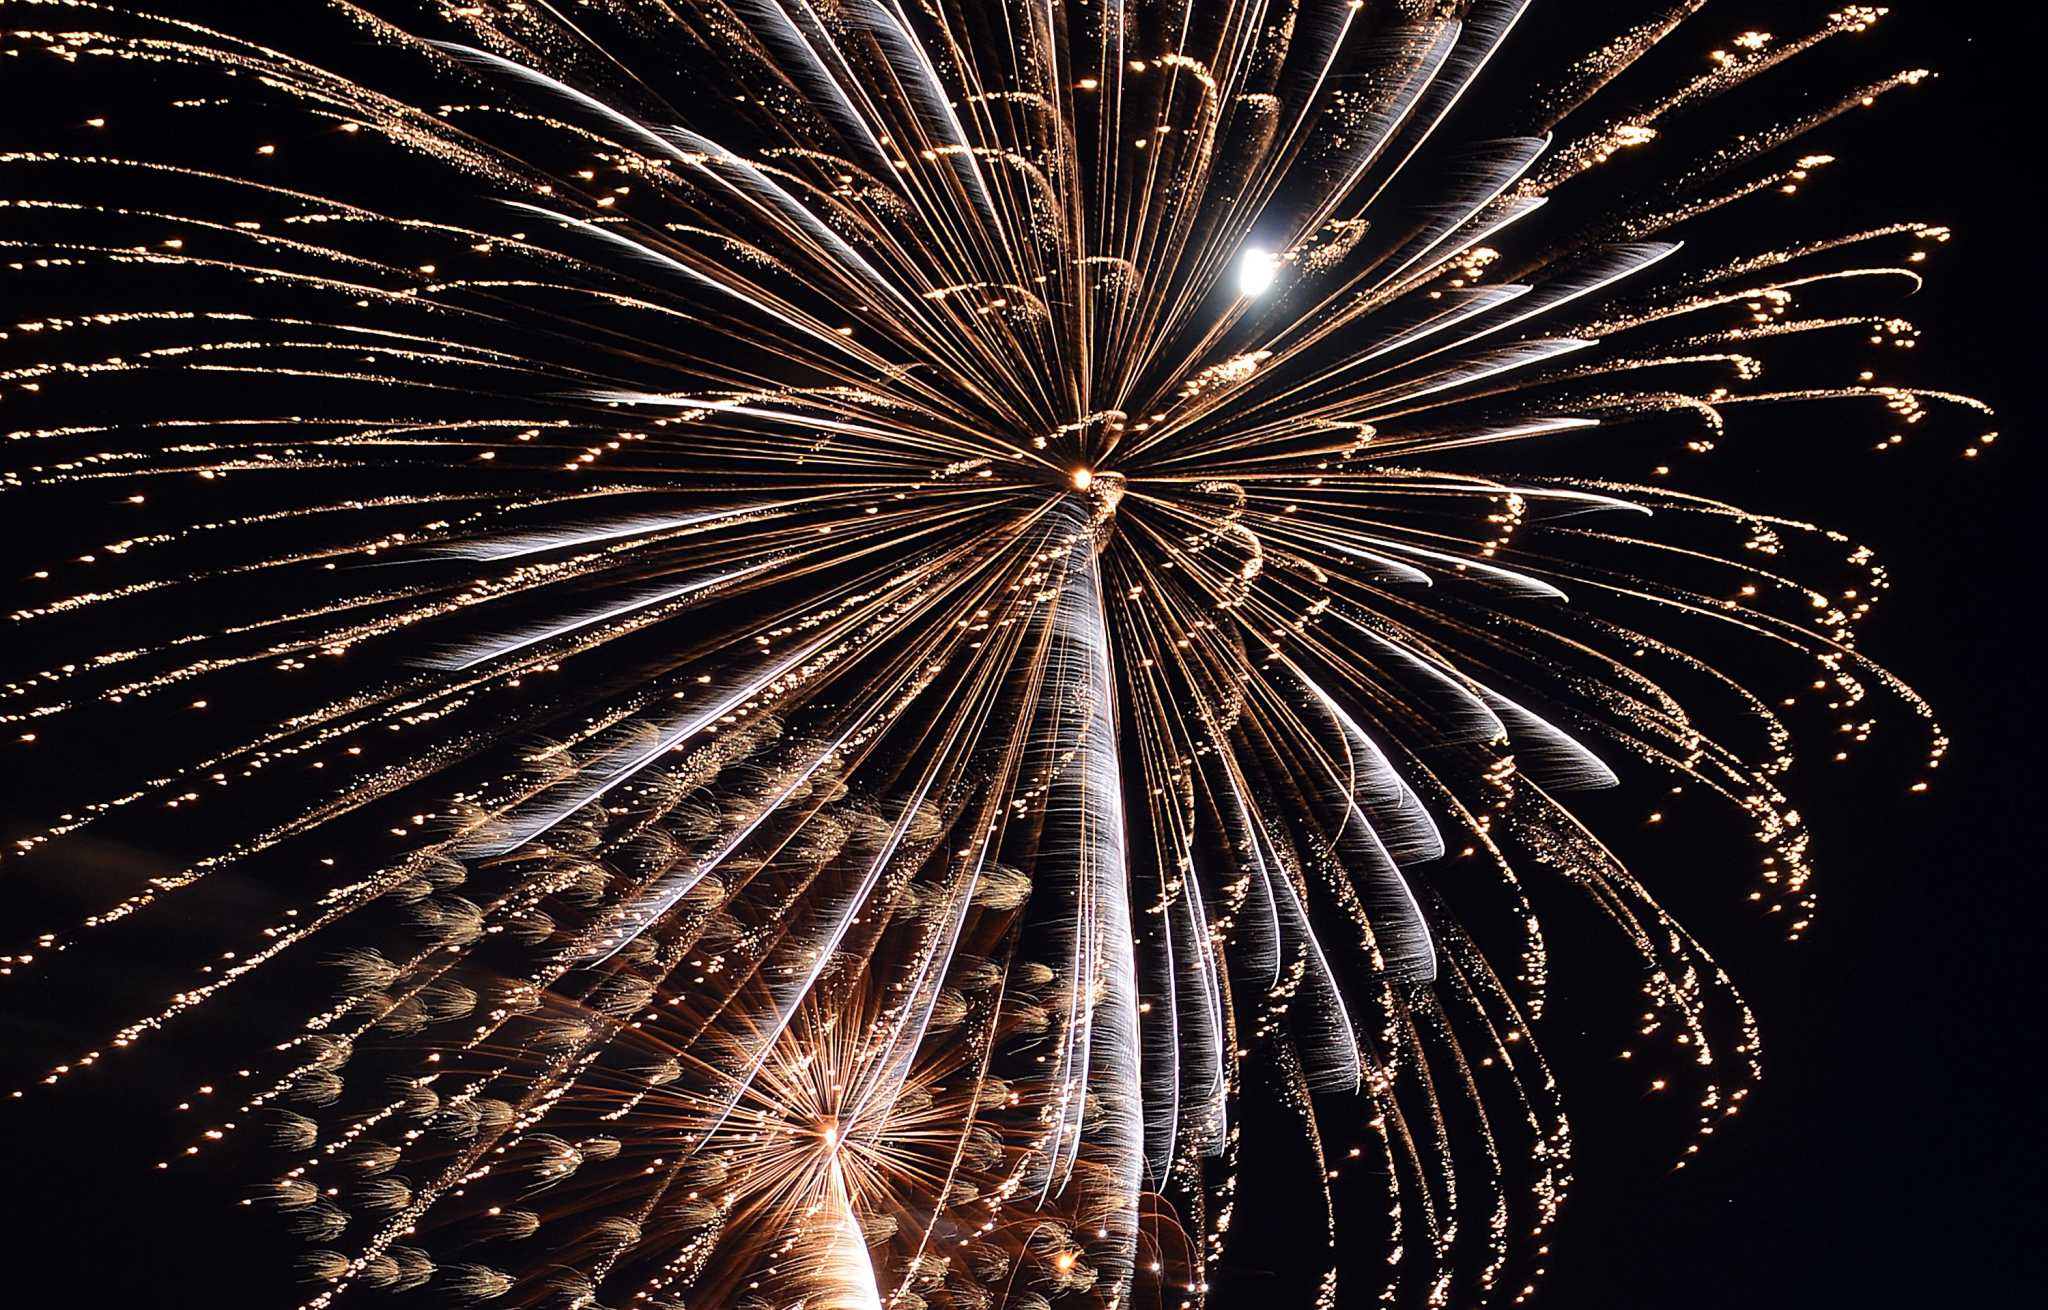 Here’s where to watch fireworks, celebrate Fourth of July in Danbury area